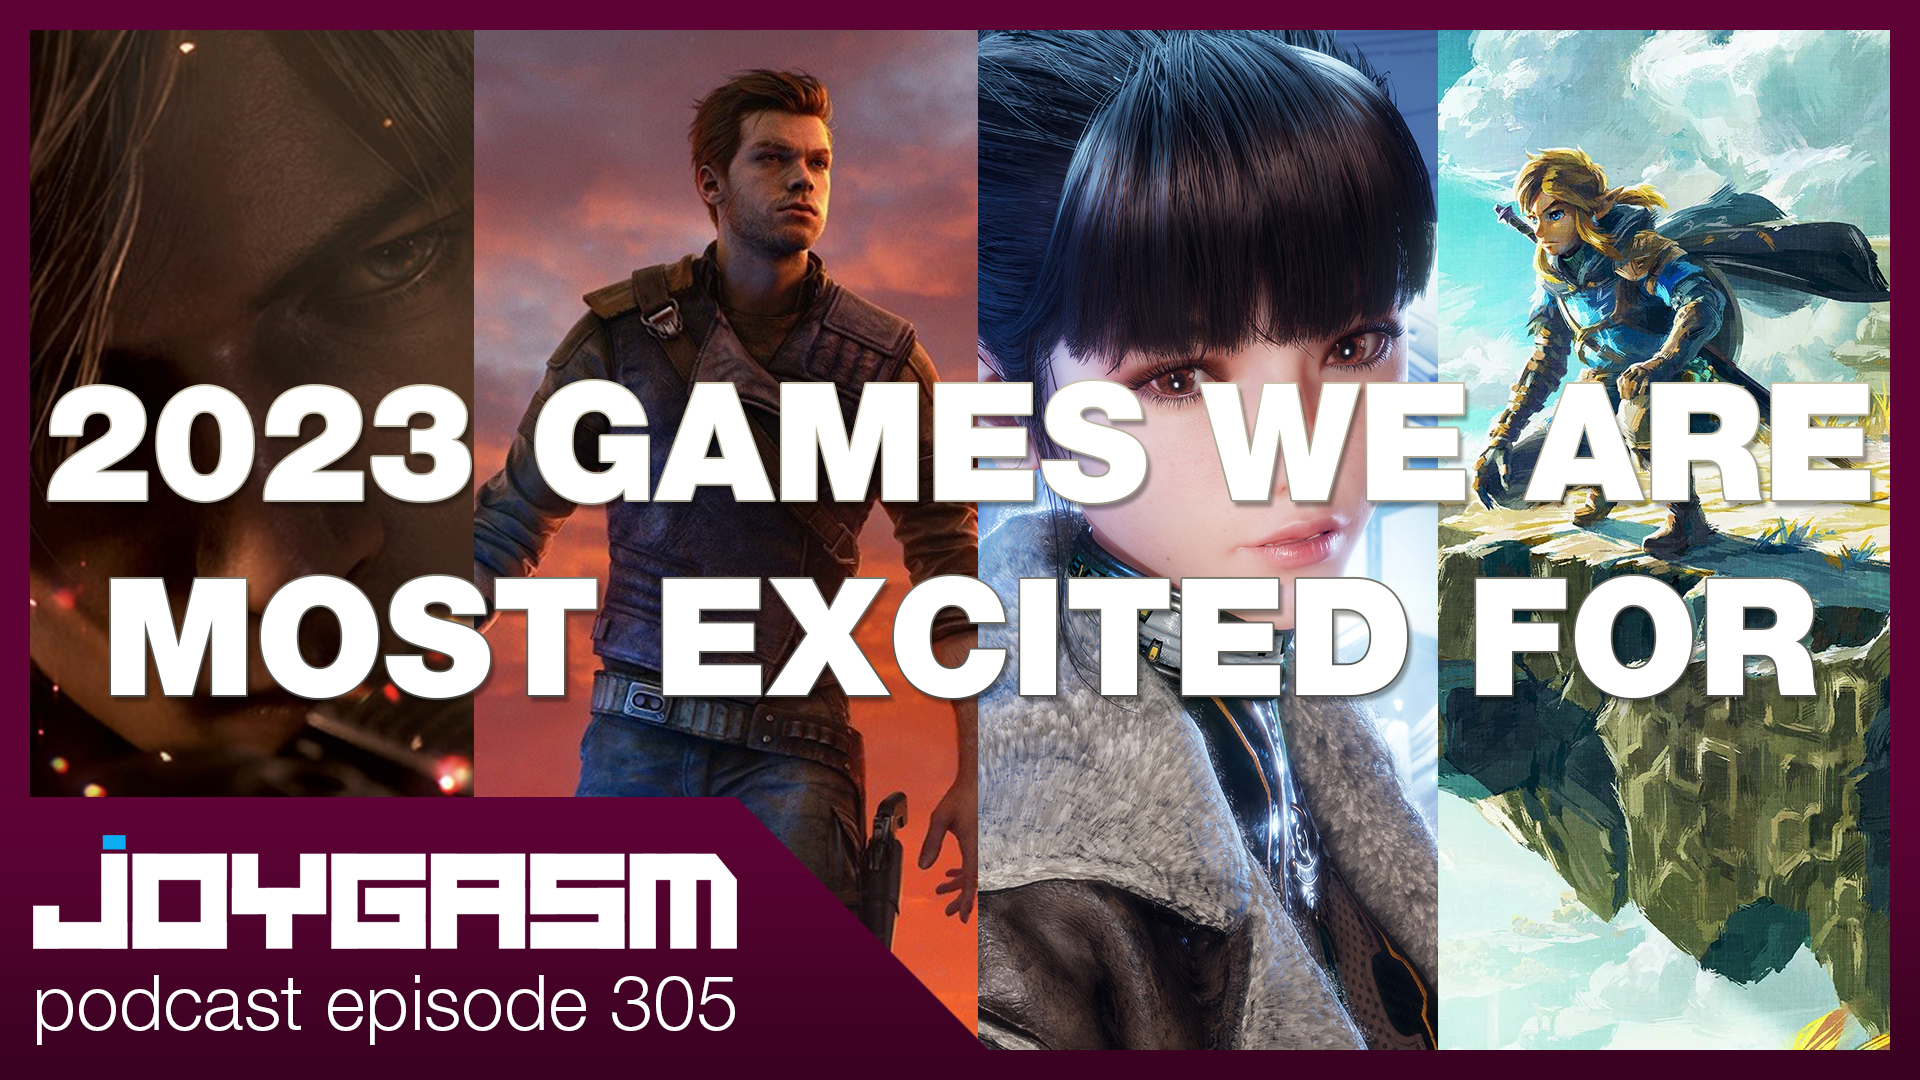 Ep. 305: 2023 Games We Are Most Excited For